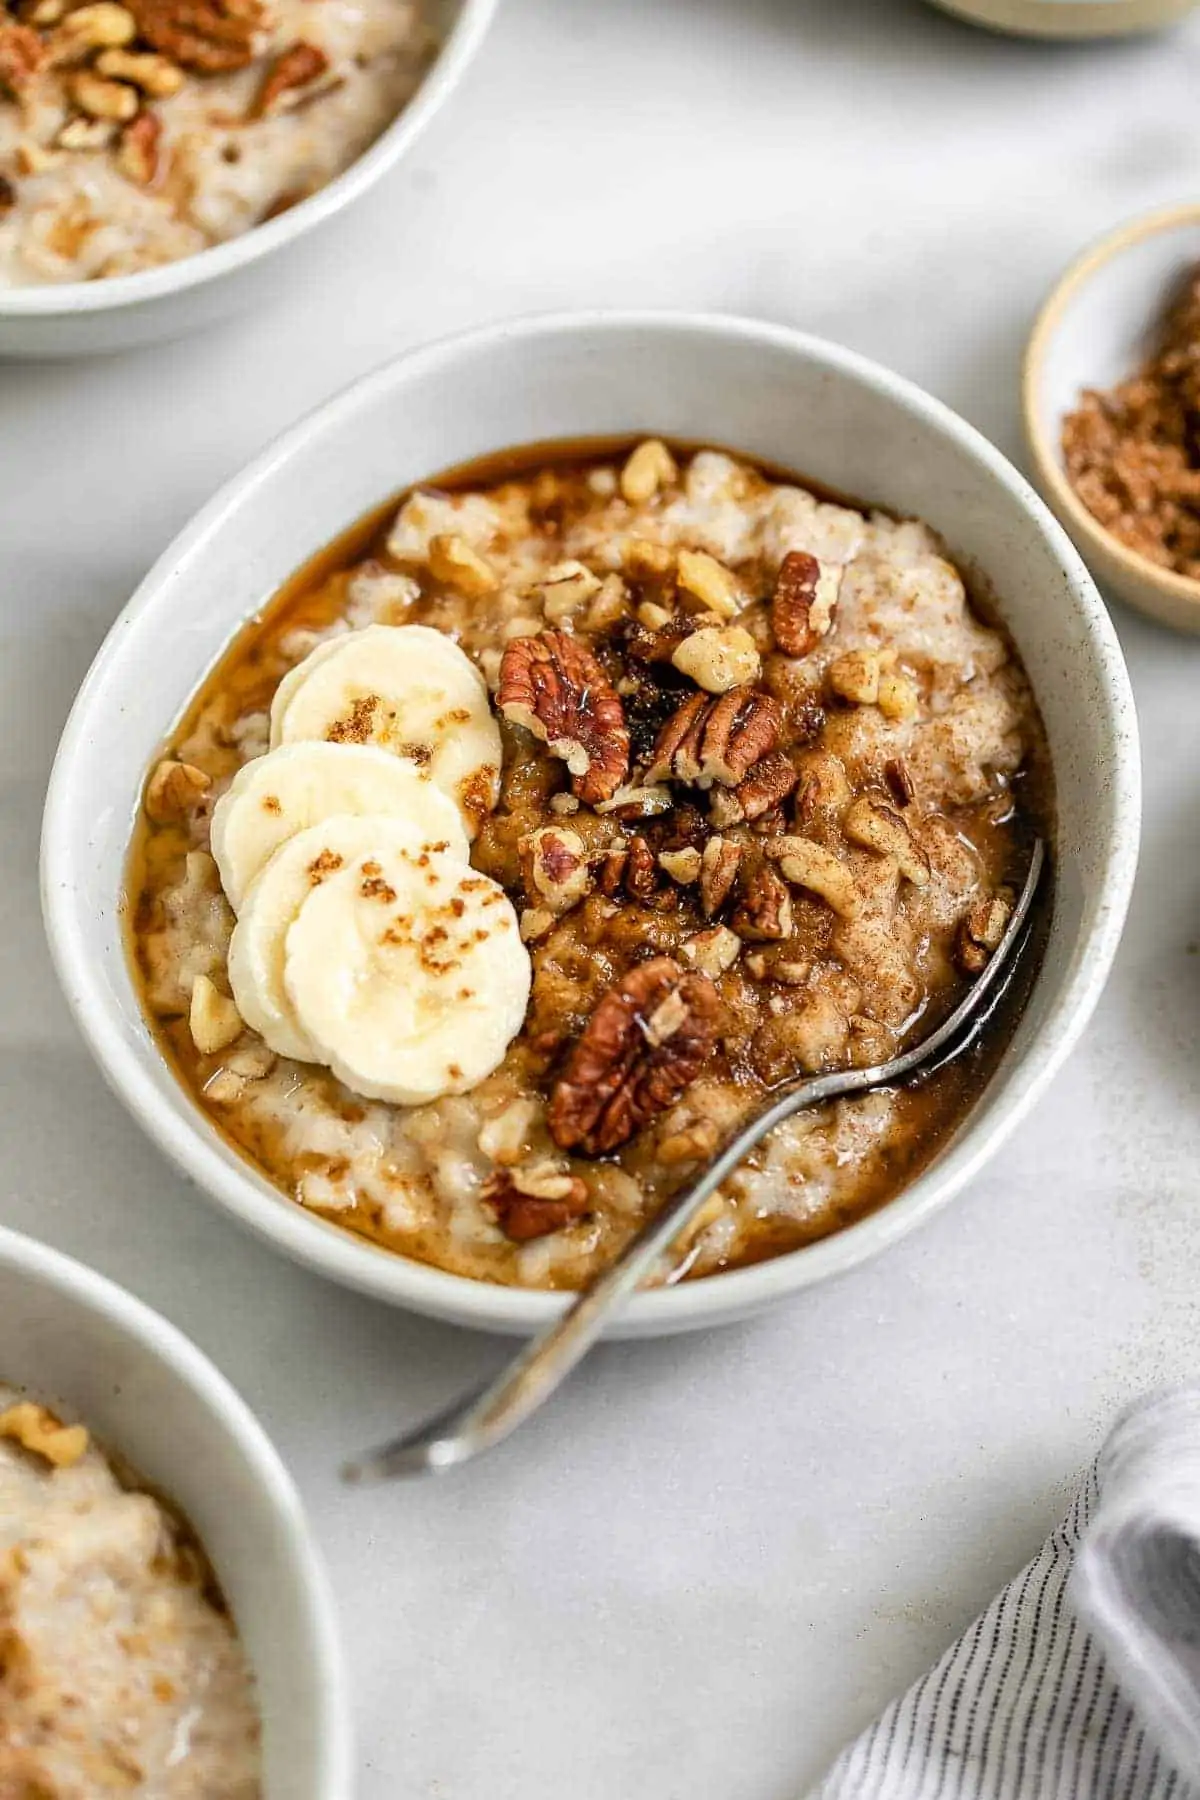 Brown sugar oatmeal in a bowl with a spoon on the side.